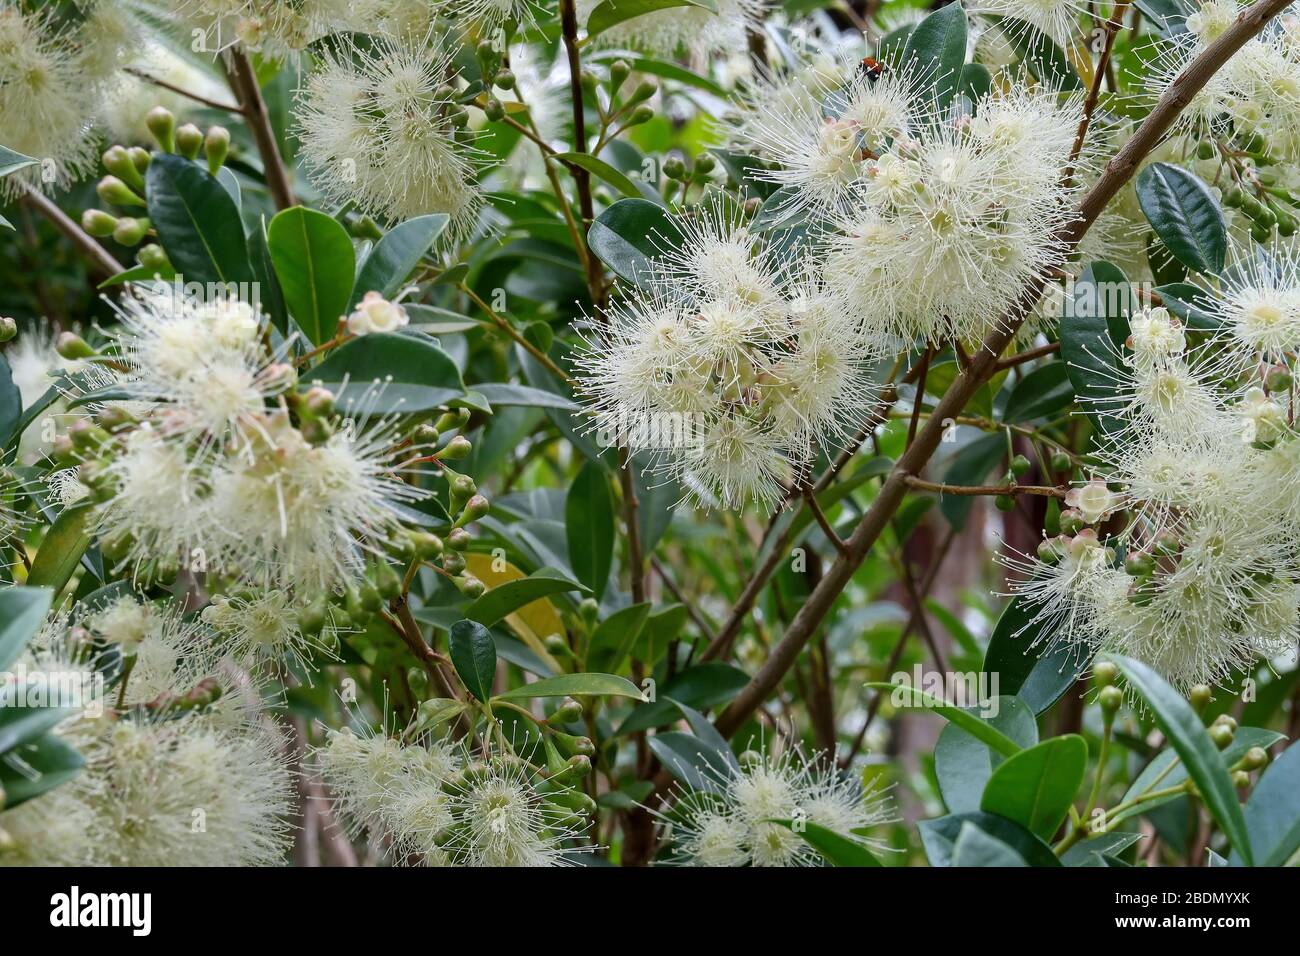 Lilly Pilly flowers in a cream color surrounded by leaves and branches. Stock Photo